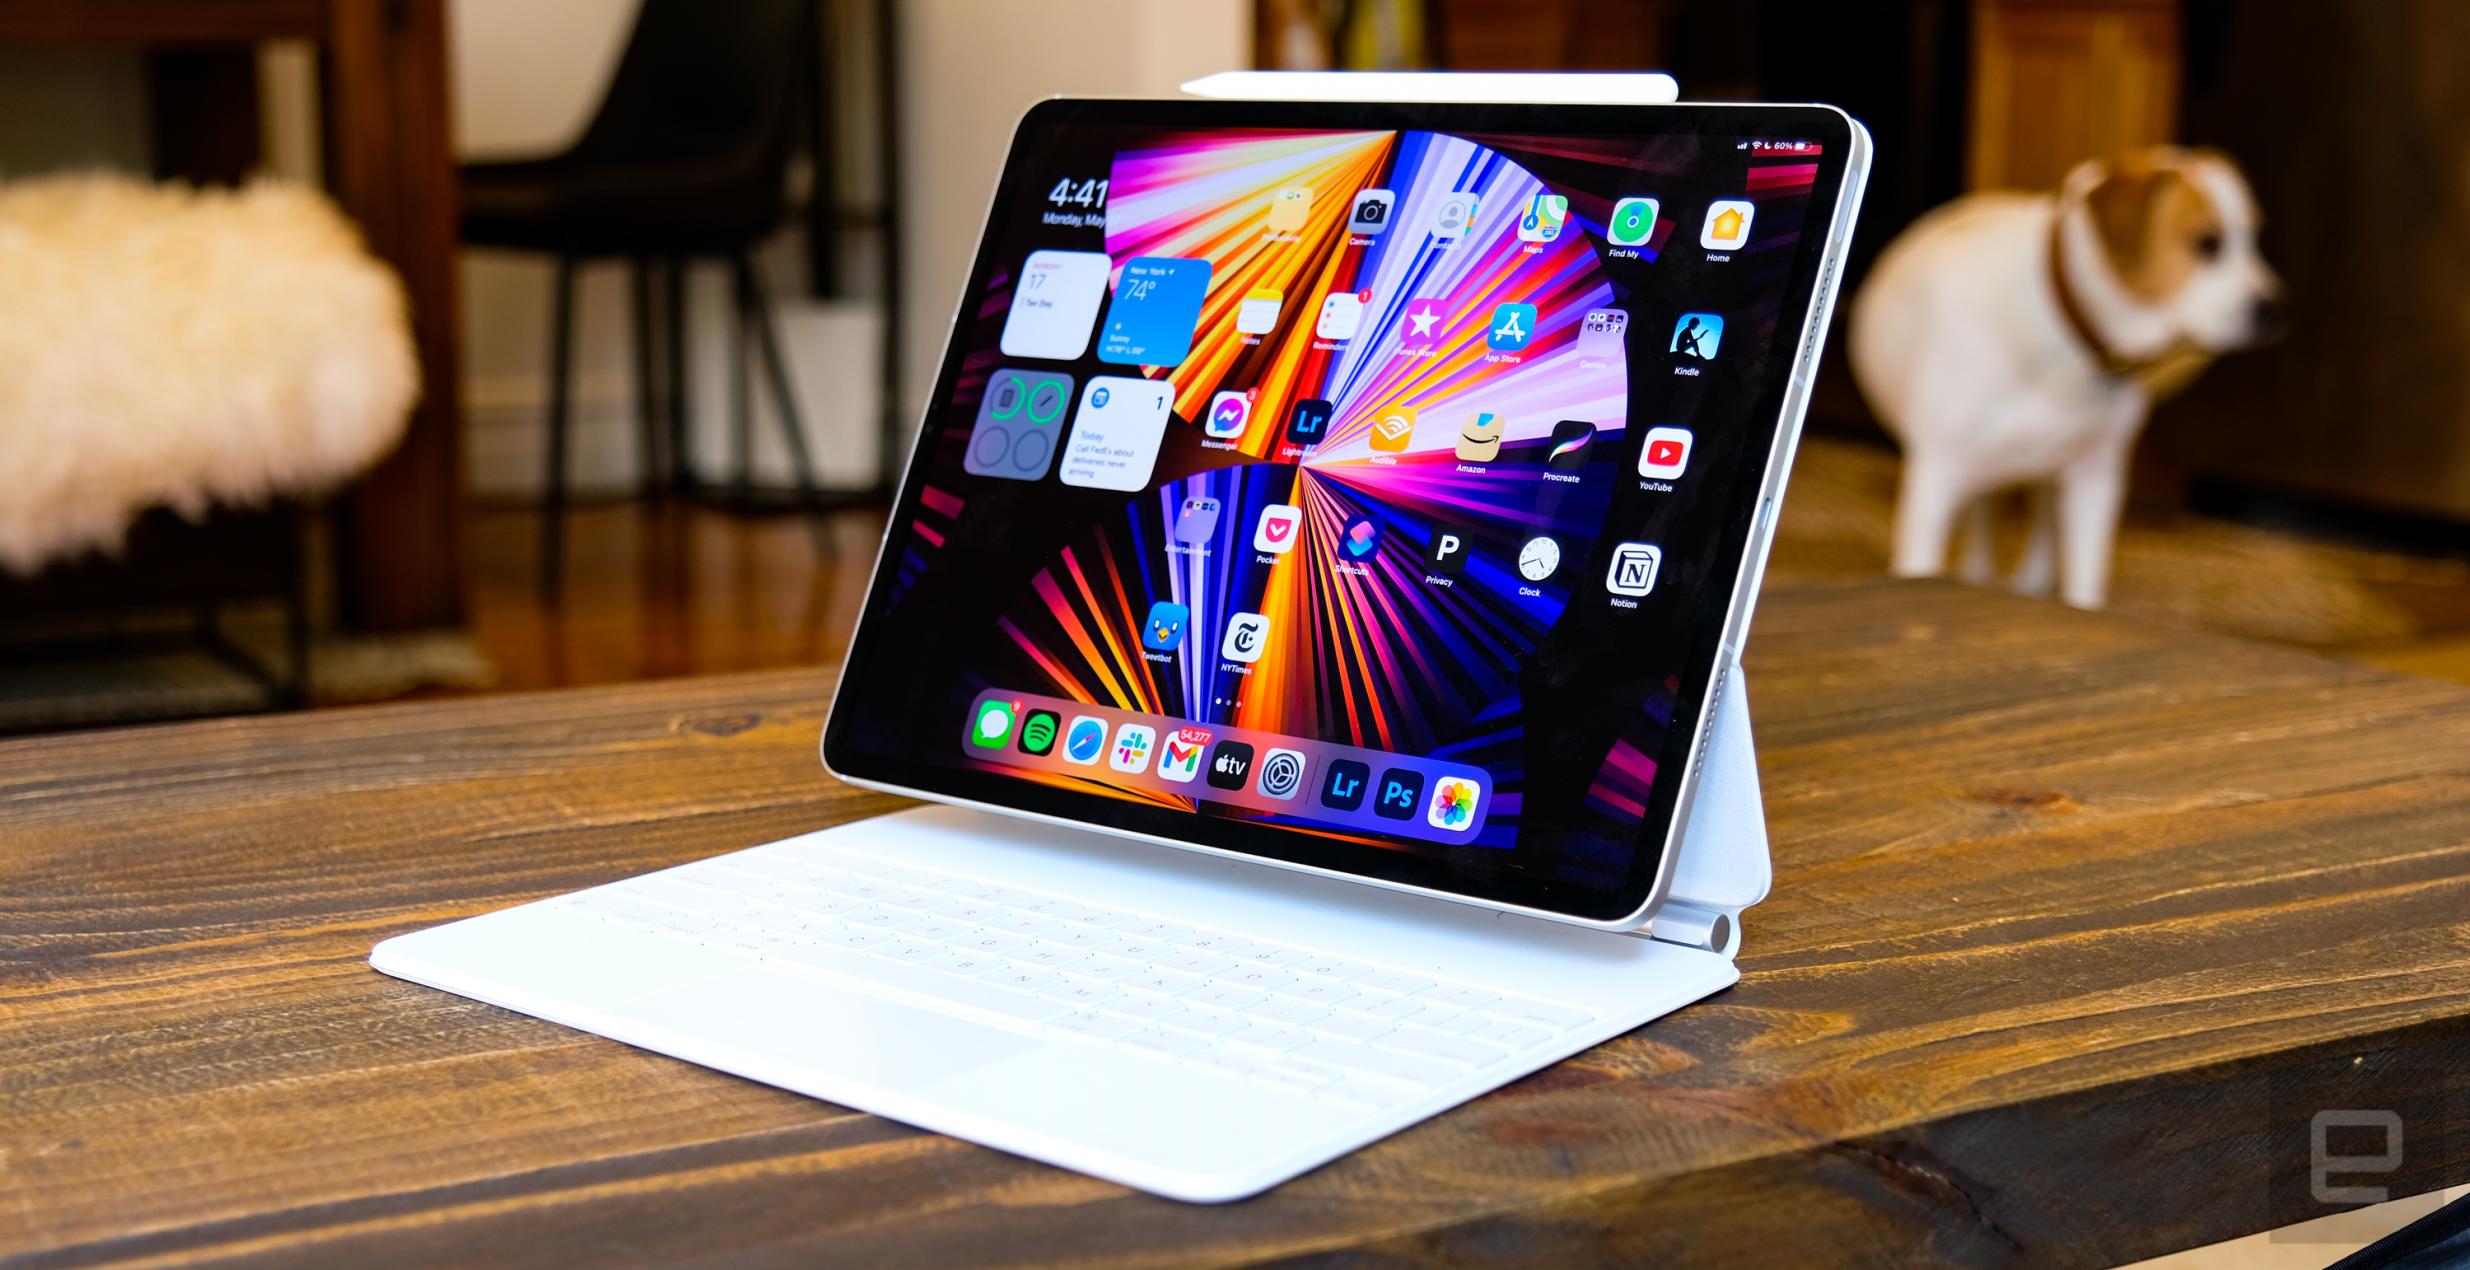 Video Review of the iPad Pro: Is Apple’s high-end tablet worth the price?